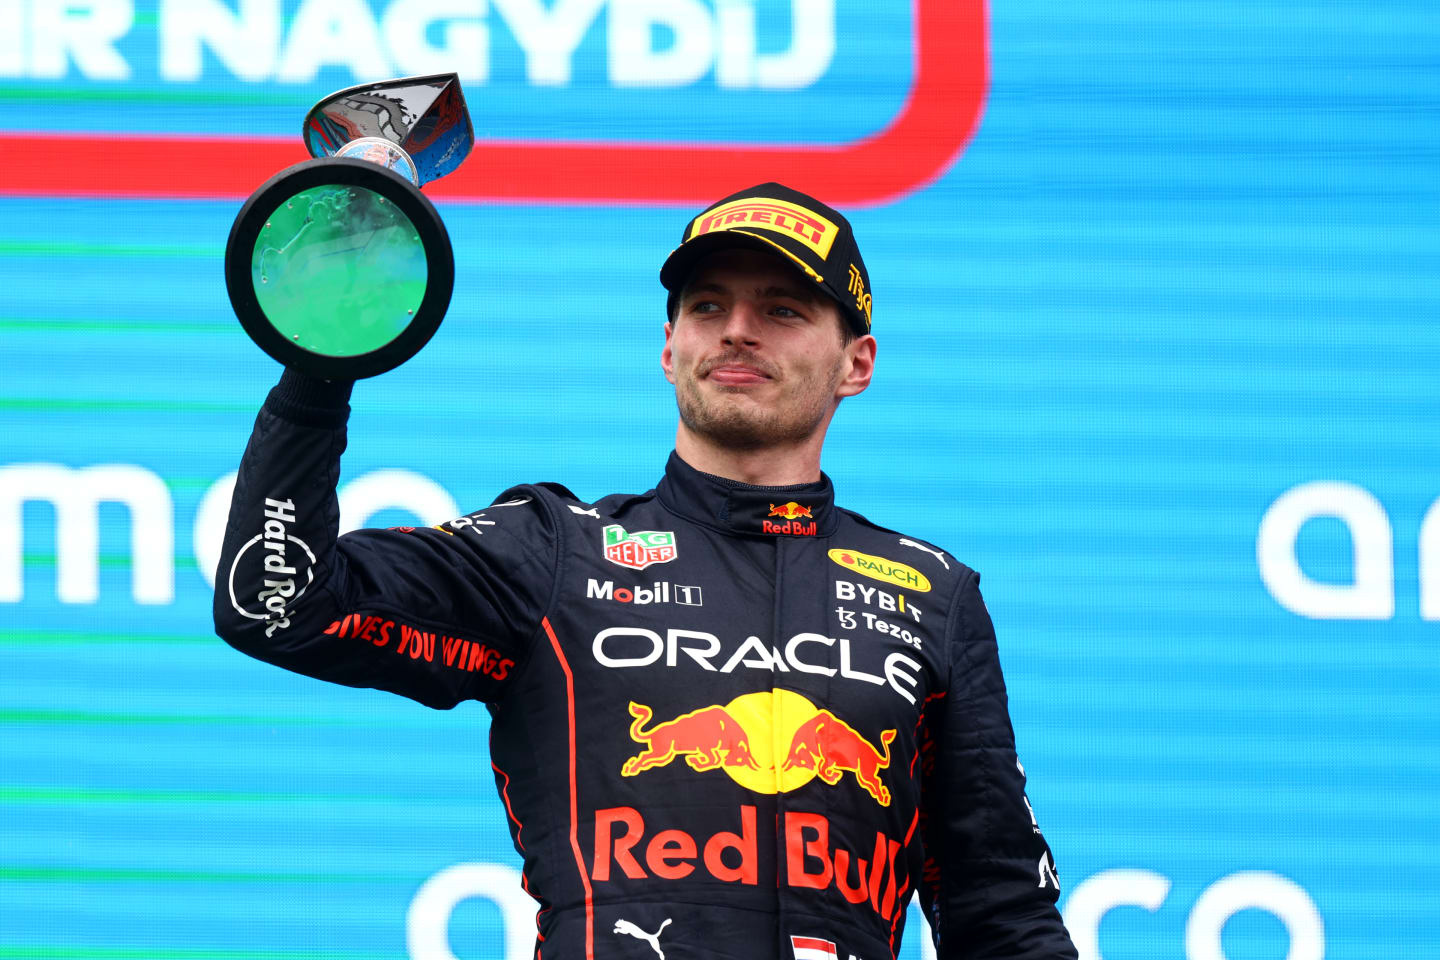 BUDAPEST, HUNGARY - JULY 31: Race winner Max Verstappen of the Netherlands and Oracle Red Bull Racing celebrates on the podium during the F1 Grand Prix of Hungary at Hungaroring on July 31, 2022 in Budapest, Hungary. (Photo by Francois Nel/Getty Images)